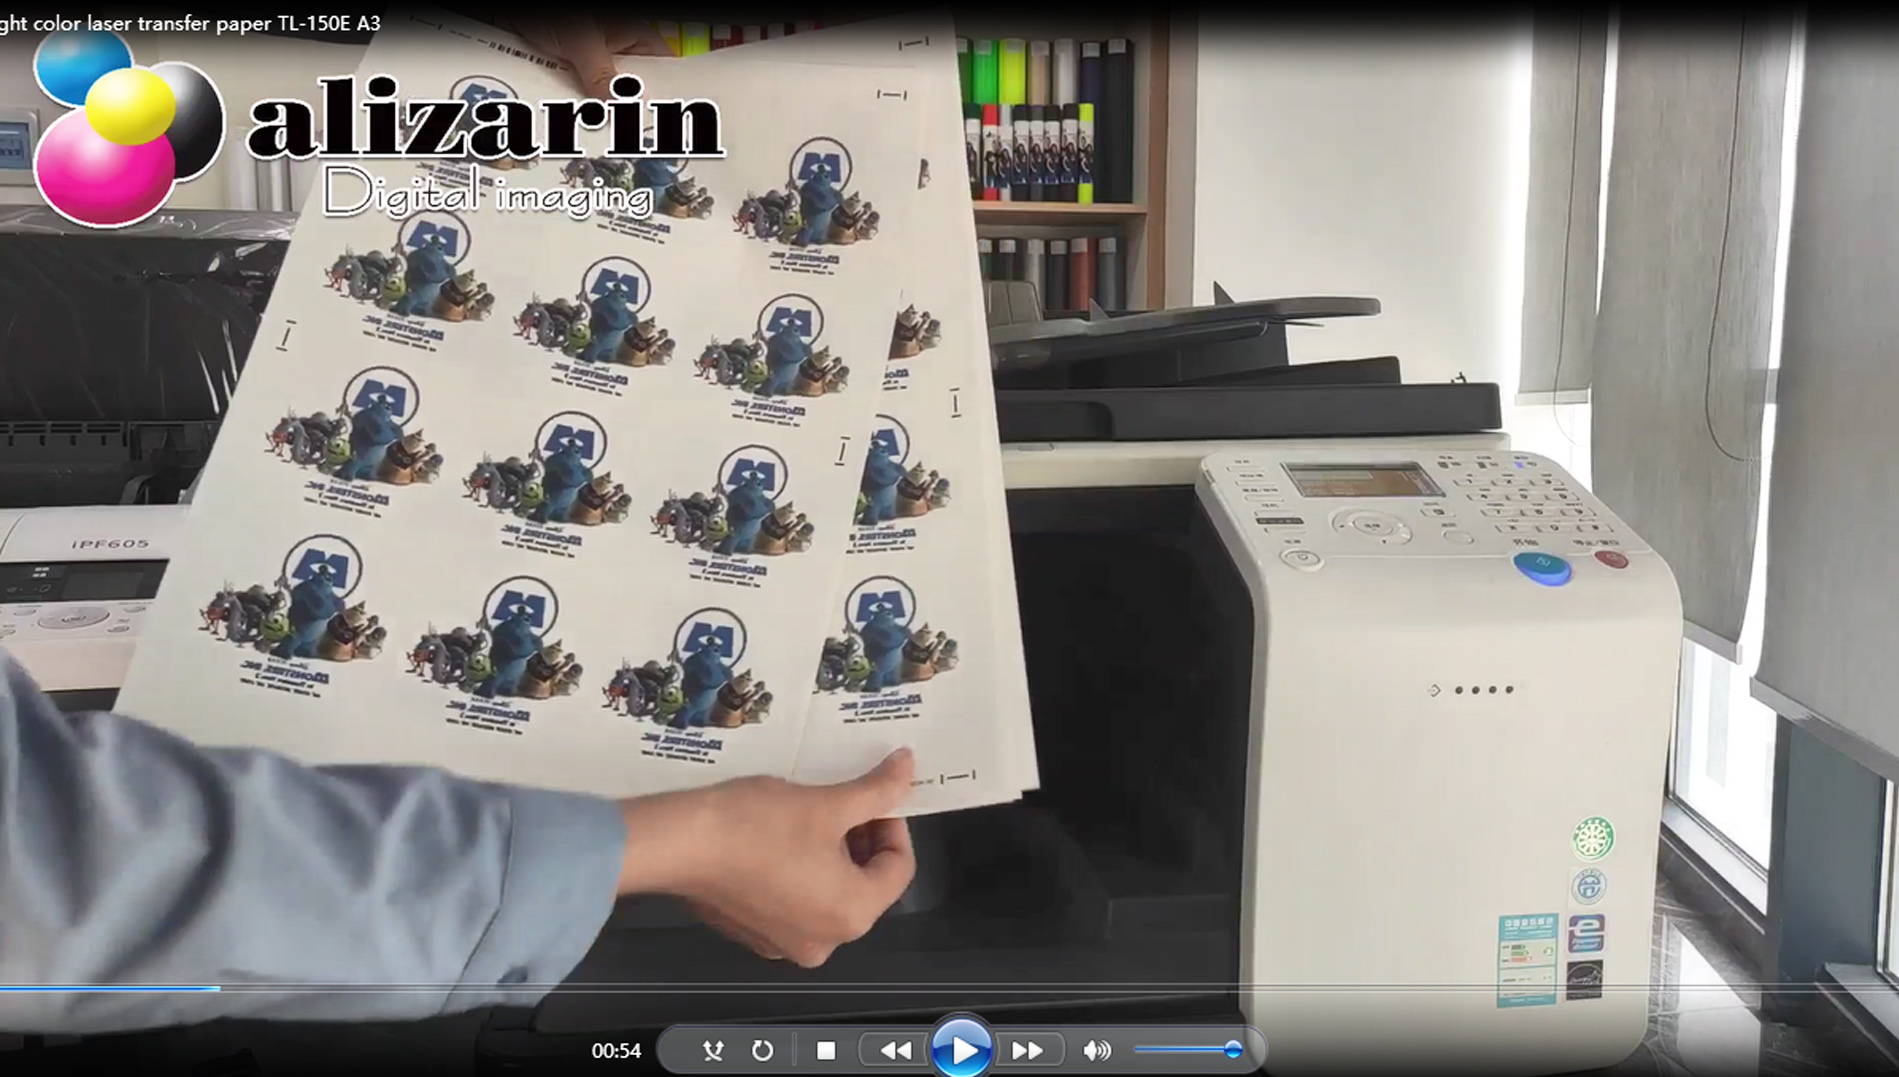 Continuous sheet to sheet printing and cutting  TL-150E laser transfer paper  AlizarinChina.com